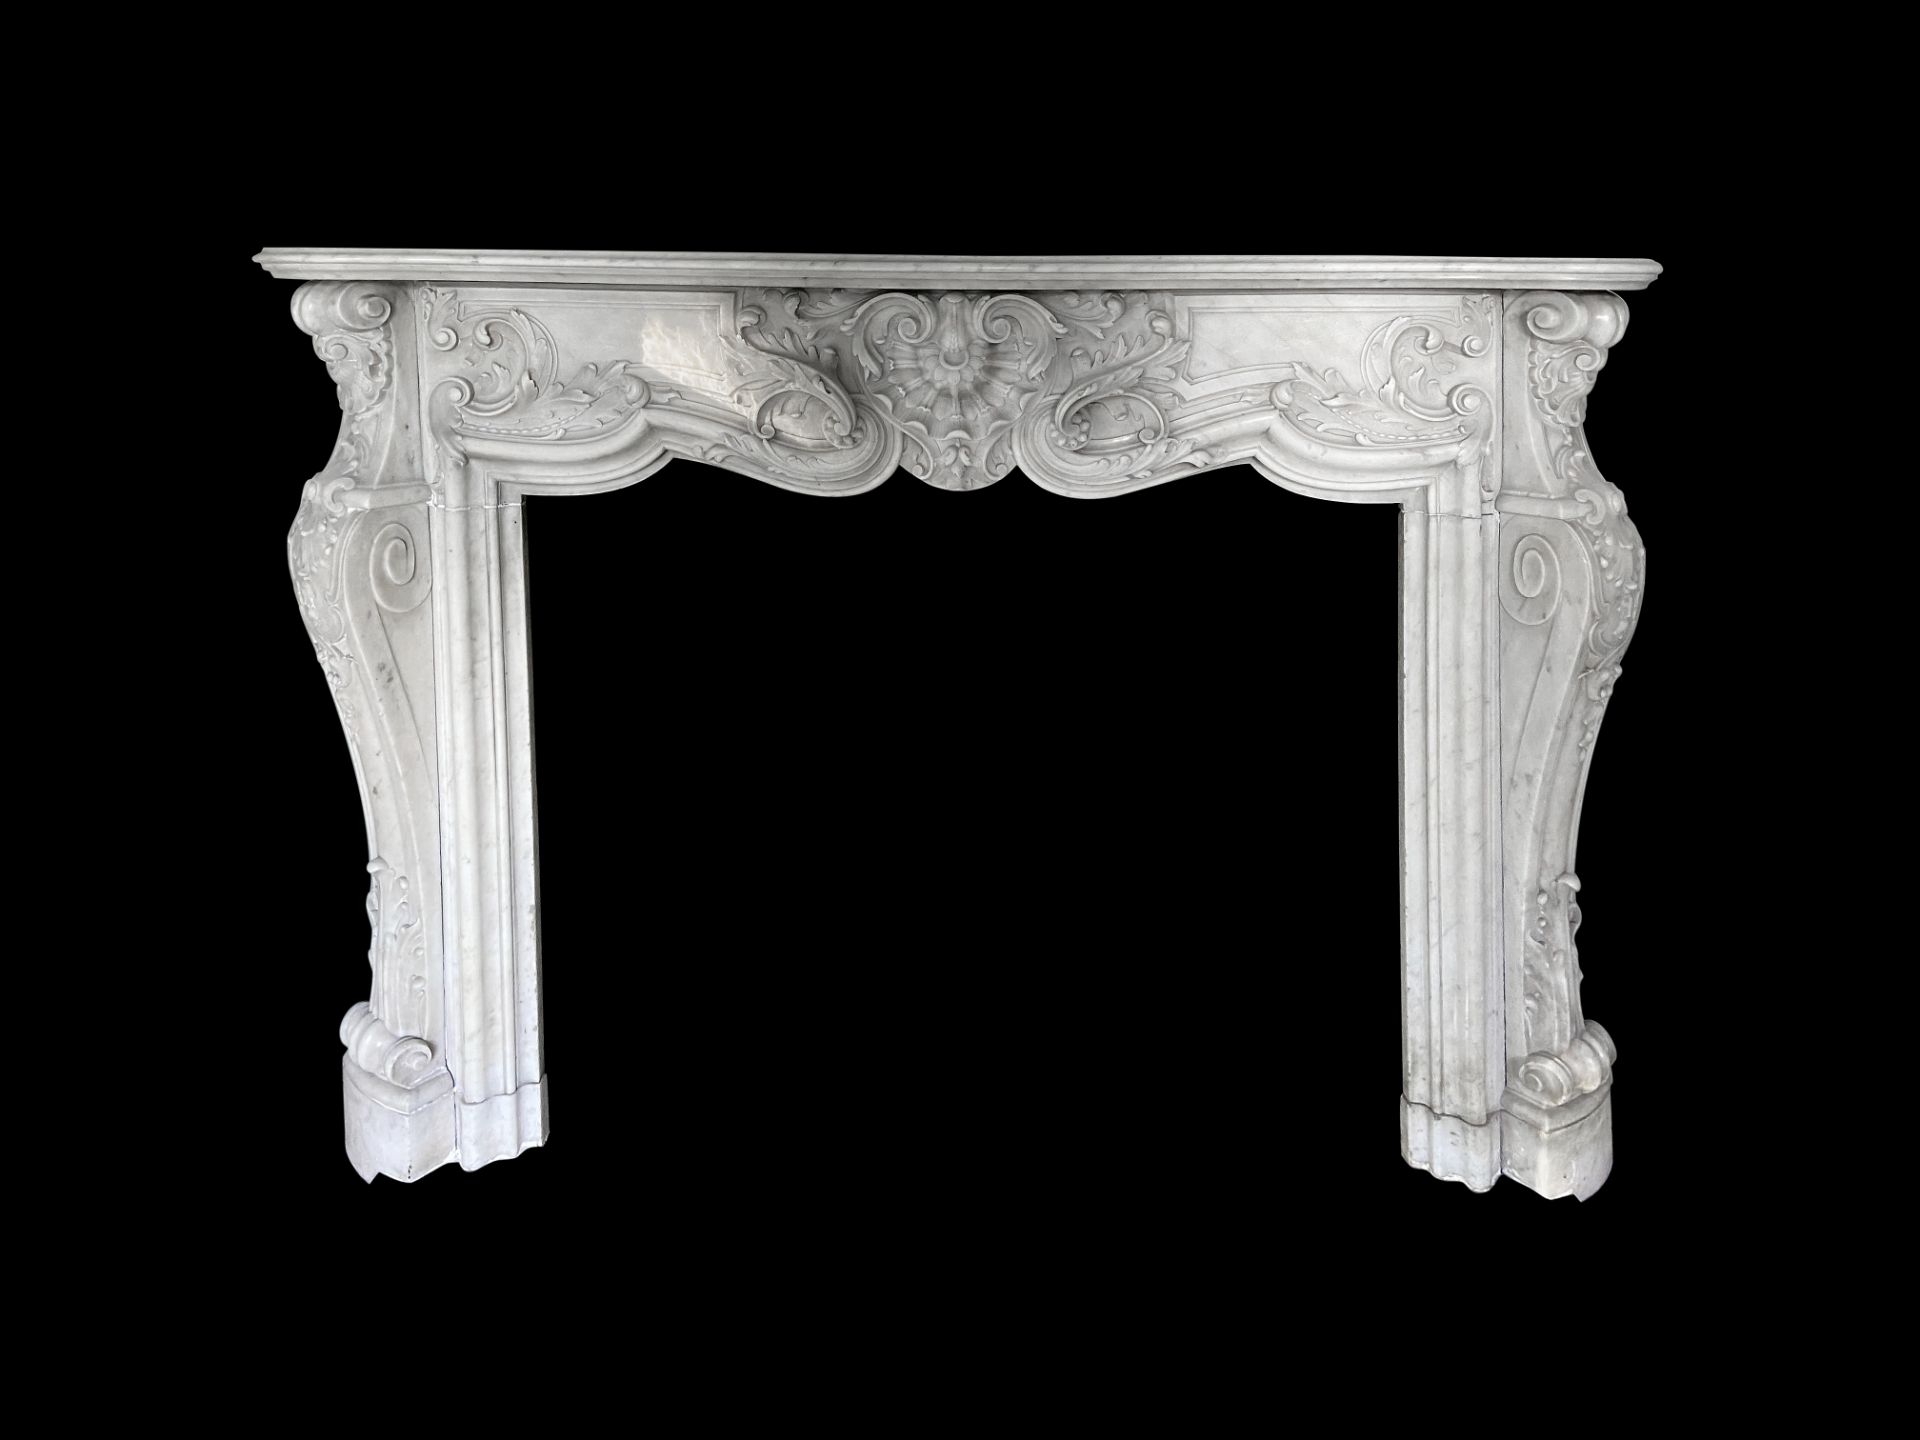 A late 19th century French carved white marble 'Pompadour' chimneypiece in the Louis XV style